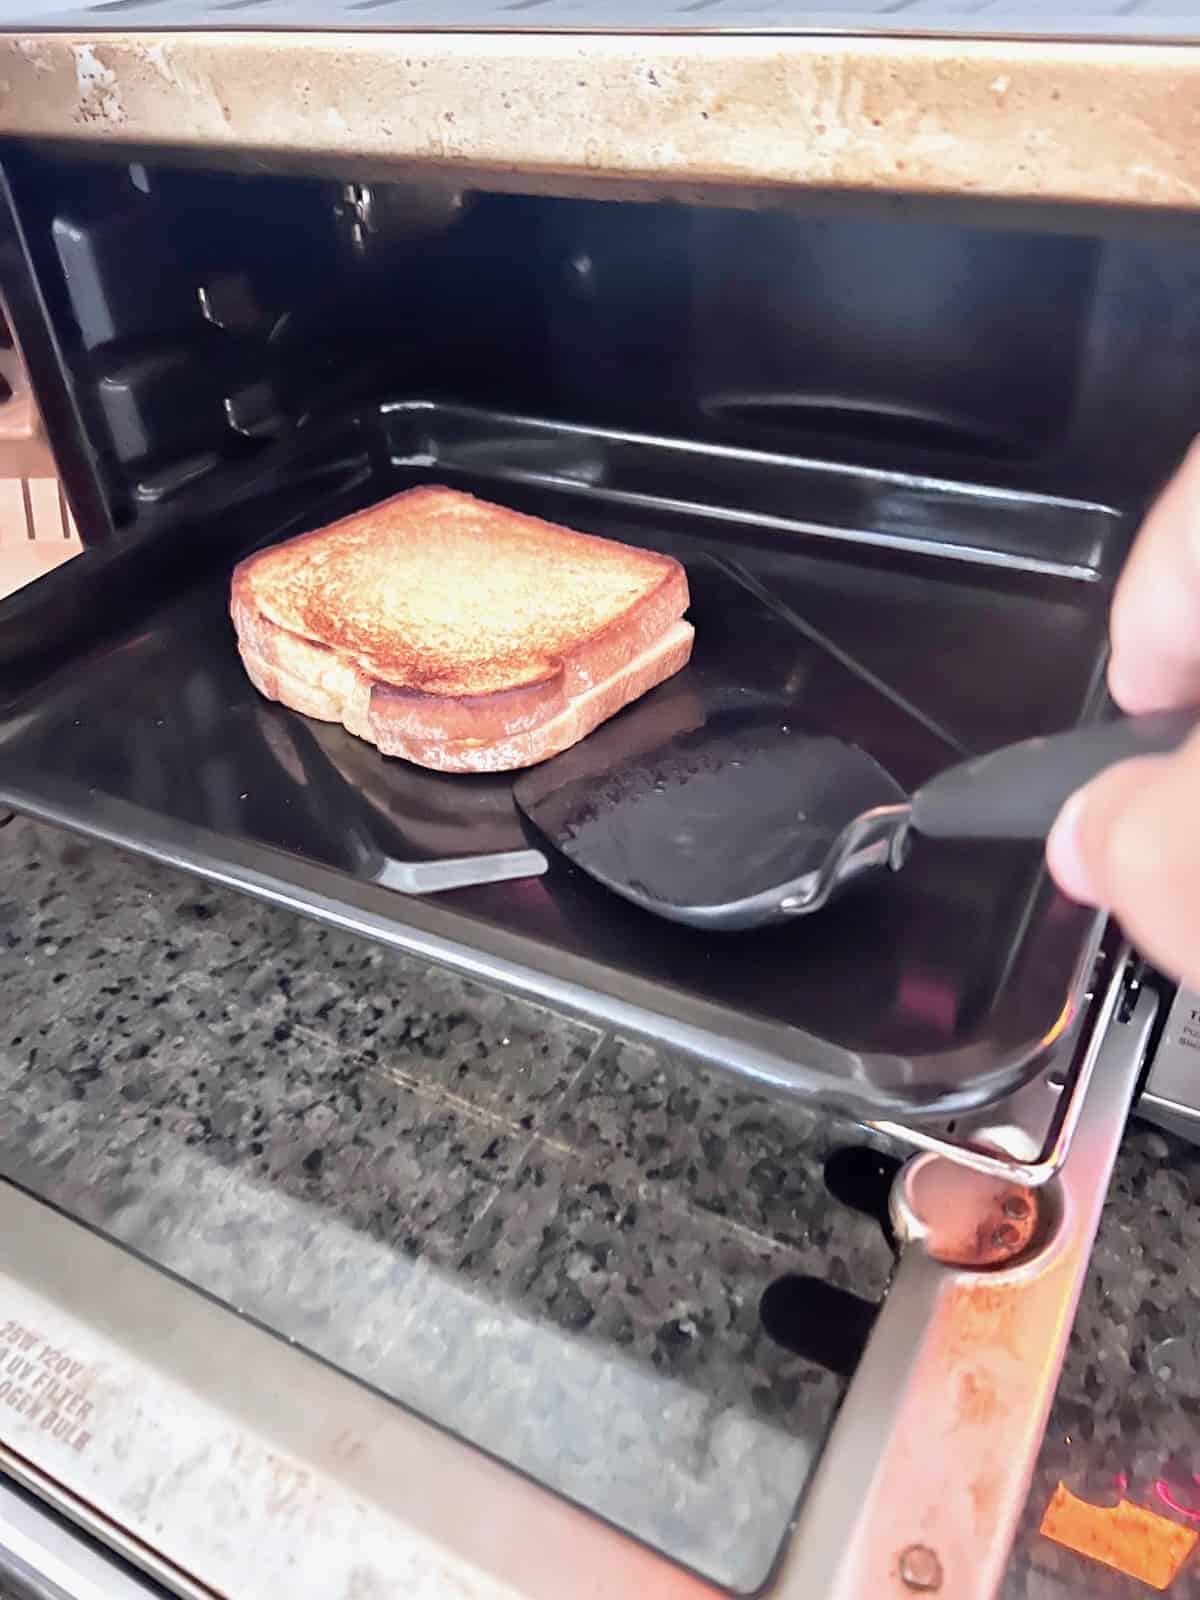 Toaster oven door open and using a spatula to flip the grilled cheese over.